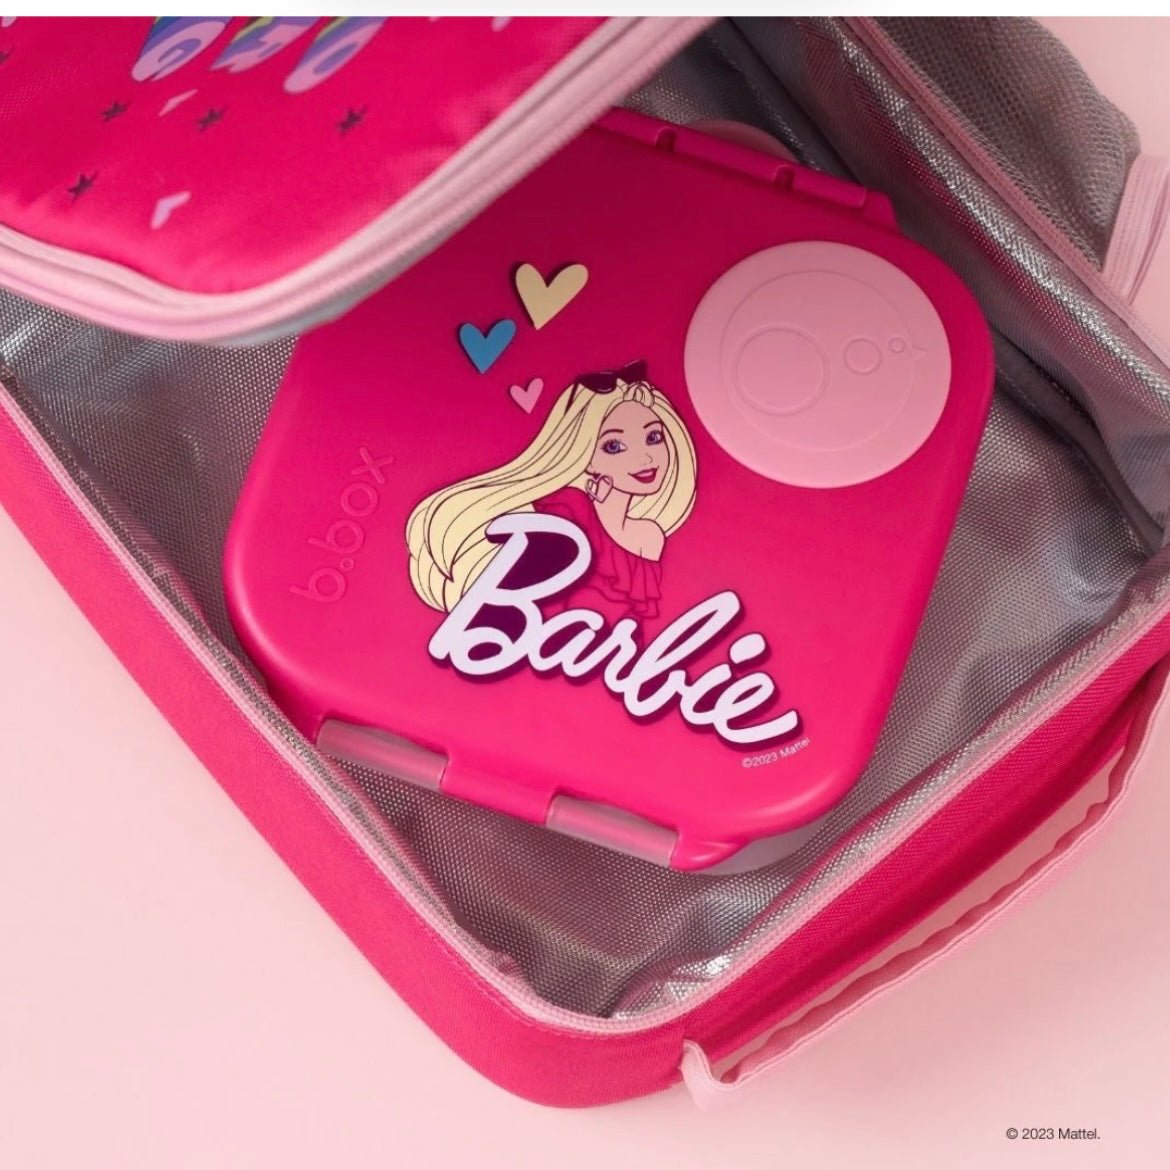 B.BOX | MINI LUNCHBOX - BARBIE™ *PRE-ORDER* by B.BOX - The Playful Collective